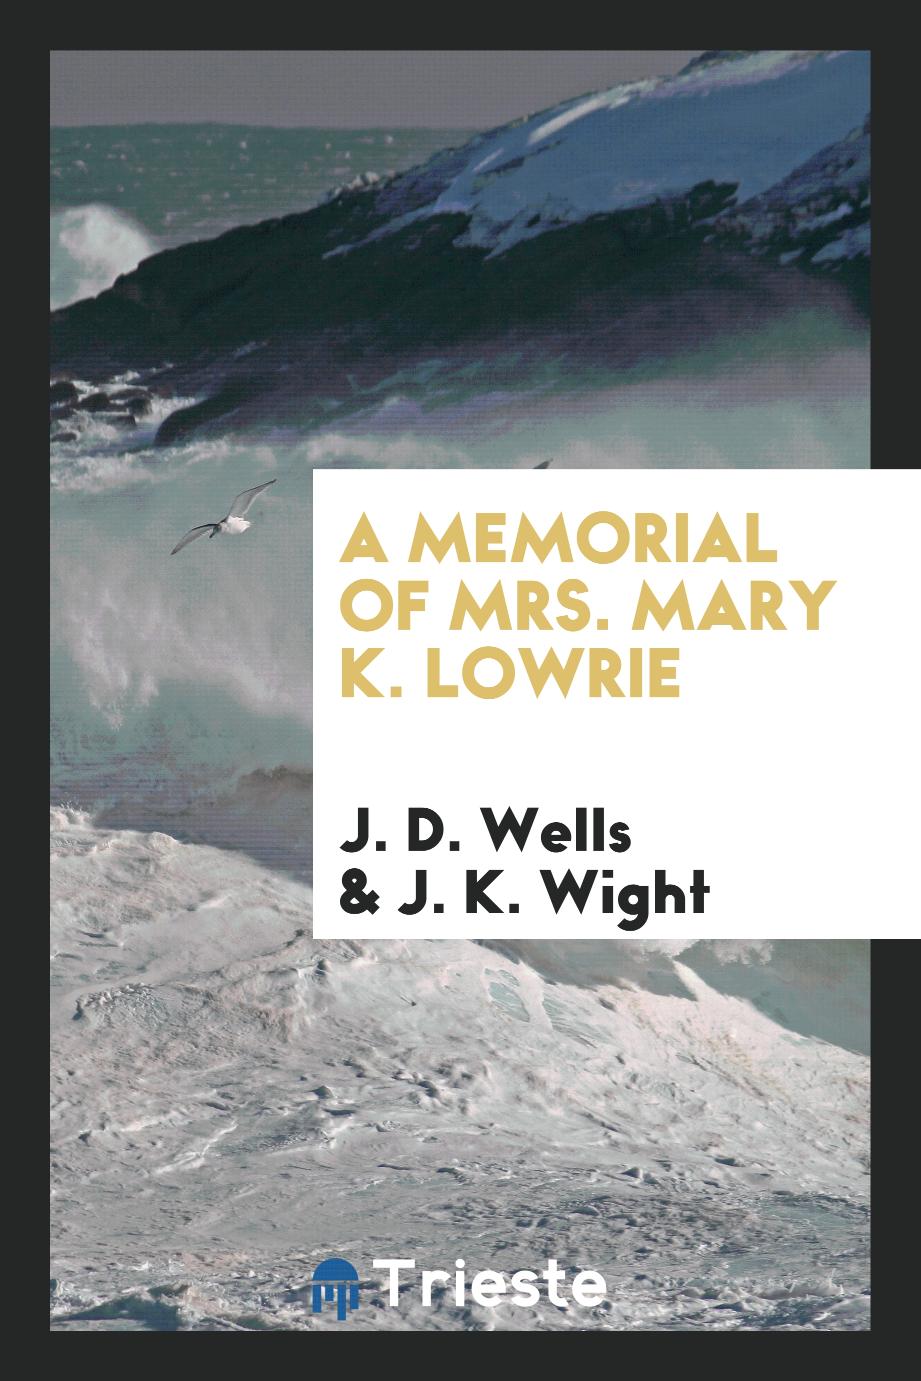 A Memorial of Mrs. Mary K. Lowrie